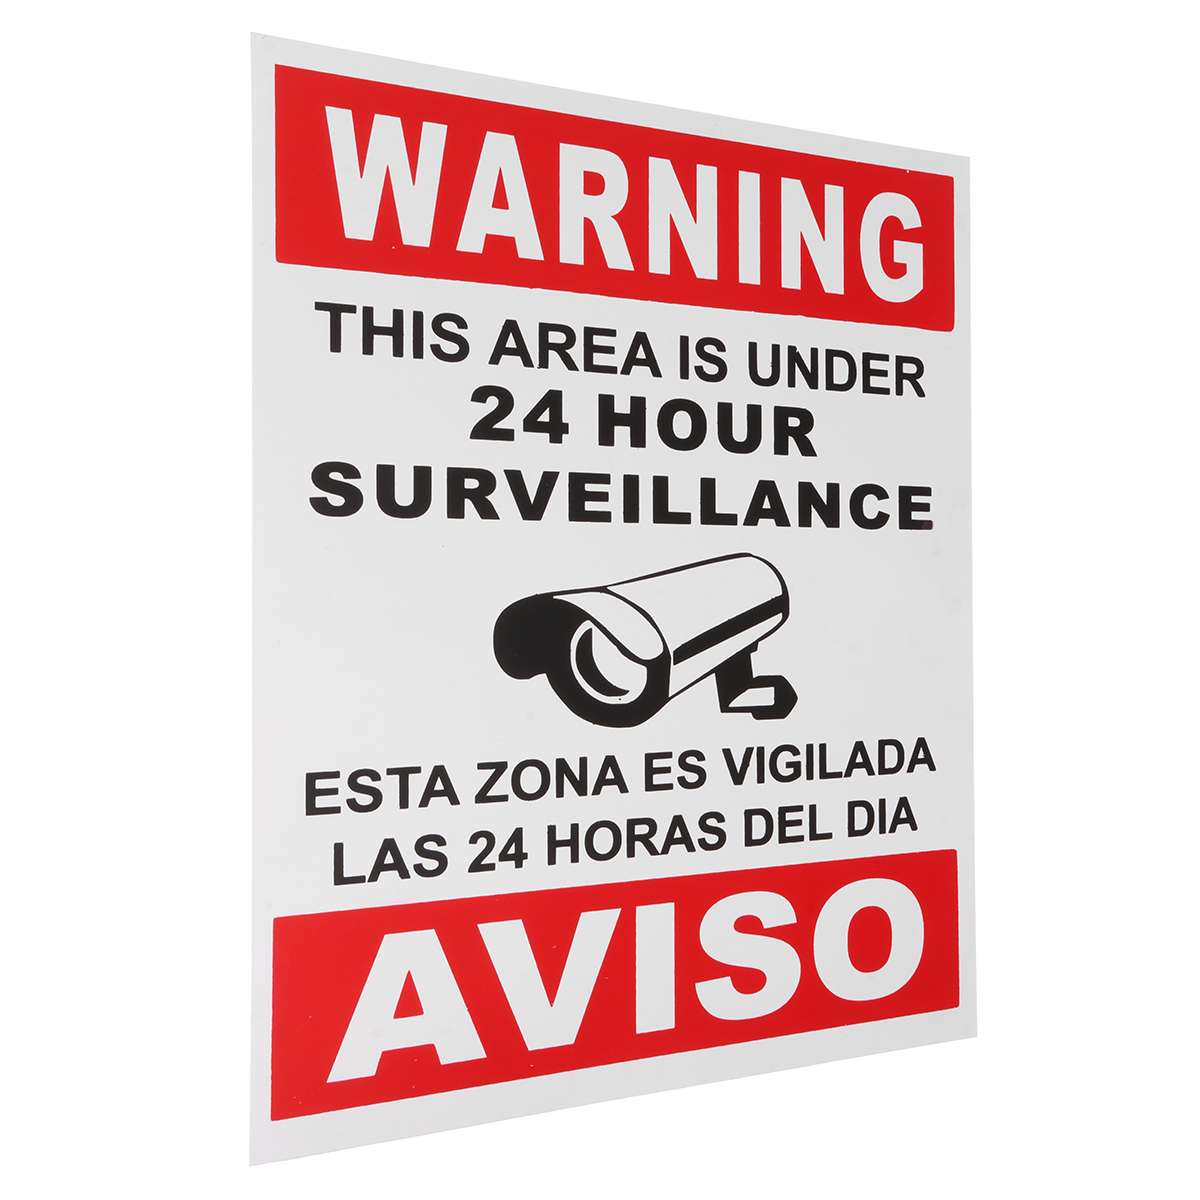 English-Spanish-Security-Warning-Sign-Camera-Sticker-Warning-This-Area-Is-Under-24-Hour-Surveillance-1180753-8